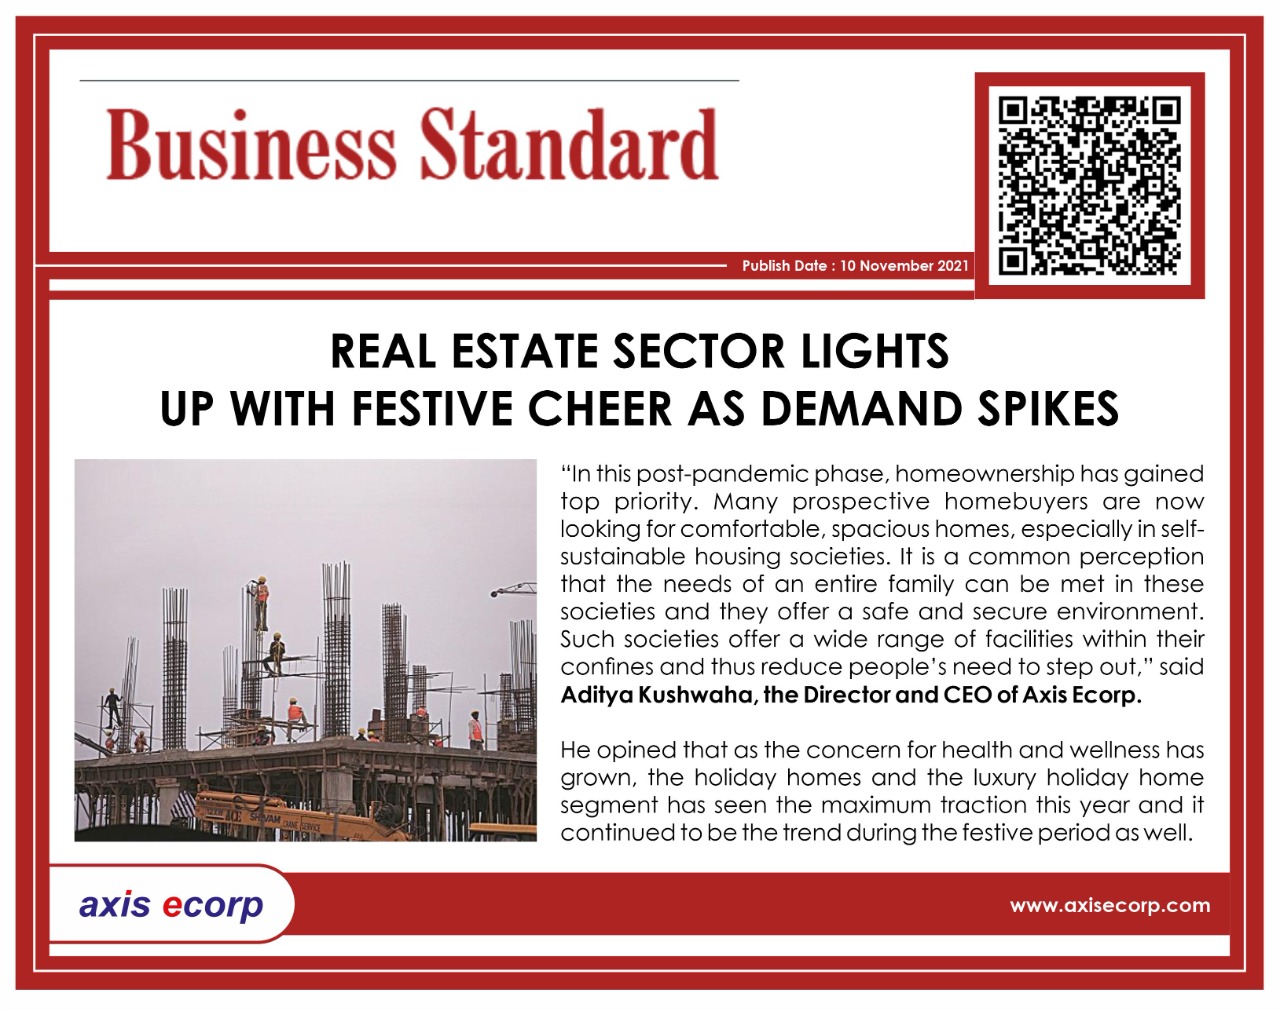 Real estate sector lights up with festive cheer as demand spikes